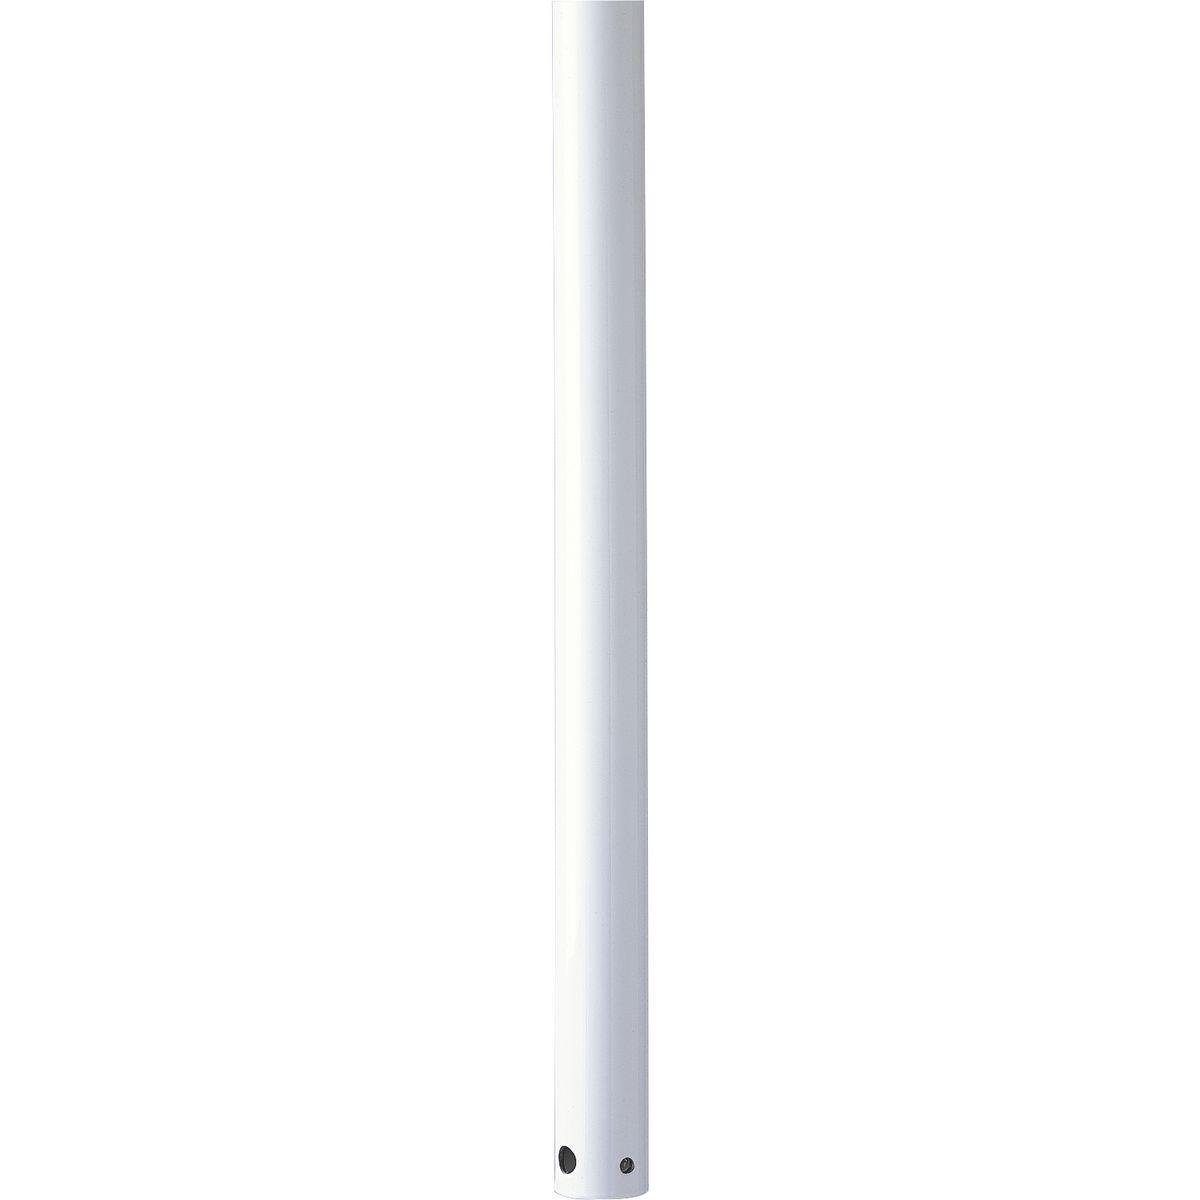 Hubbell P2604-28 3/4 In. x 18 In. downrod for use with any Progress Lighting ceiling fan. Use of a fan downrod positions your ceiling fan at the optimal height for air circulation and provides the perfect solution for installation on high cathedral ceilings or in great ro